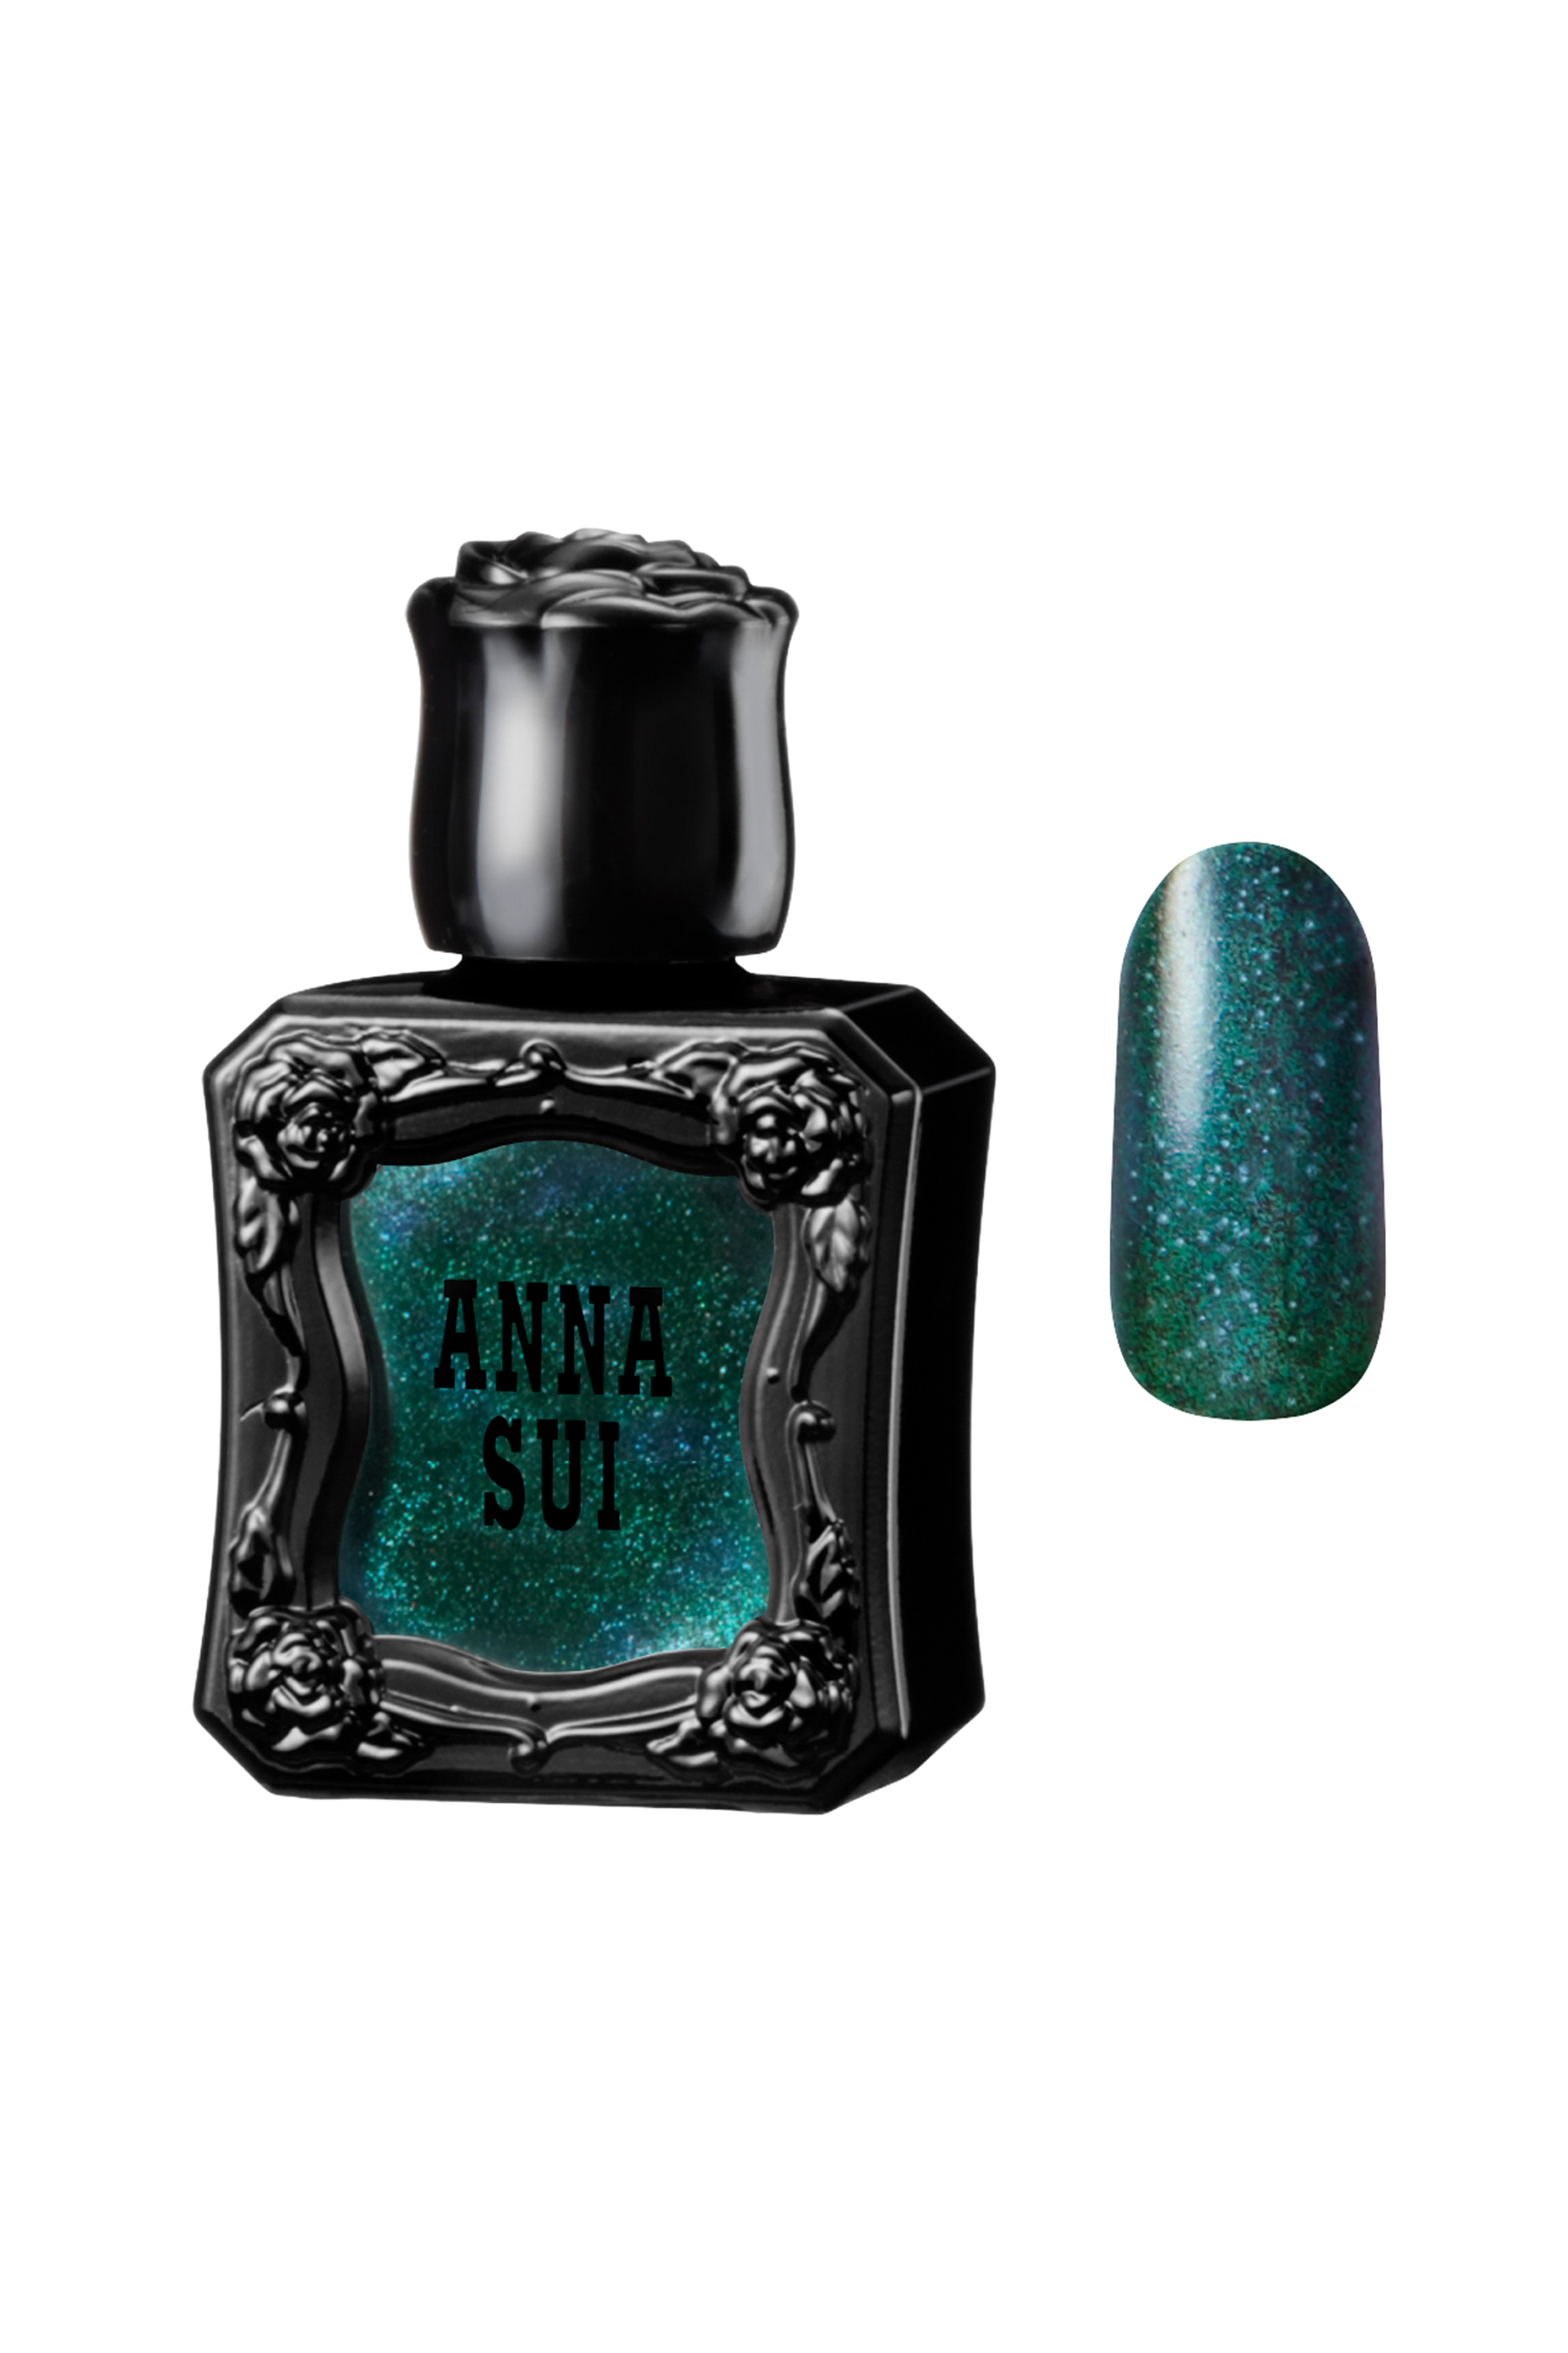 EMERALD Nail Polish bottles, with raised rose pattern, Anna Sui in black over nail colors in bottle front